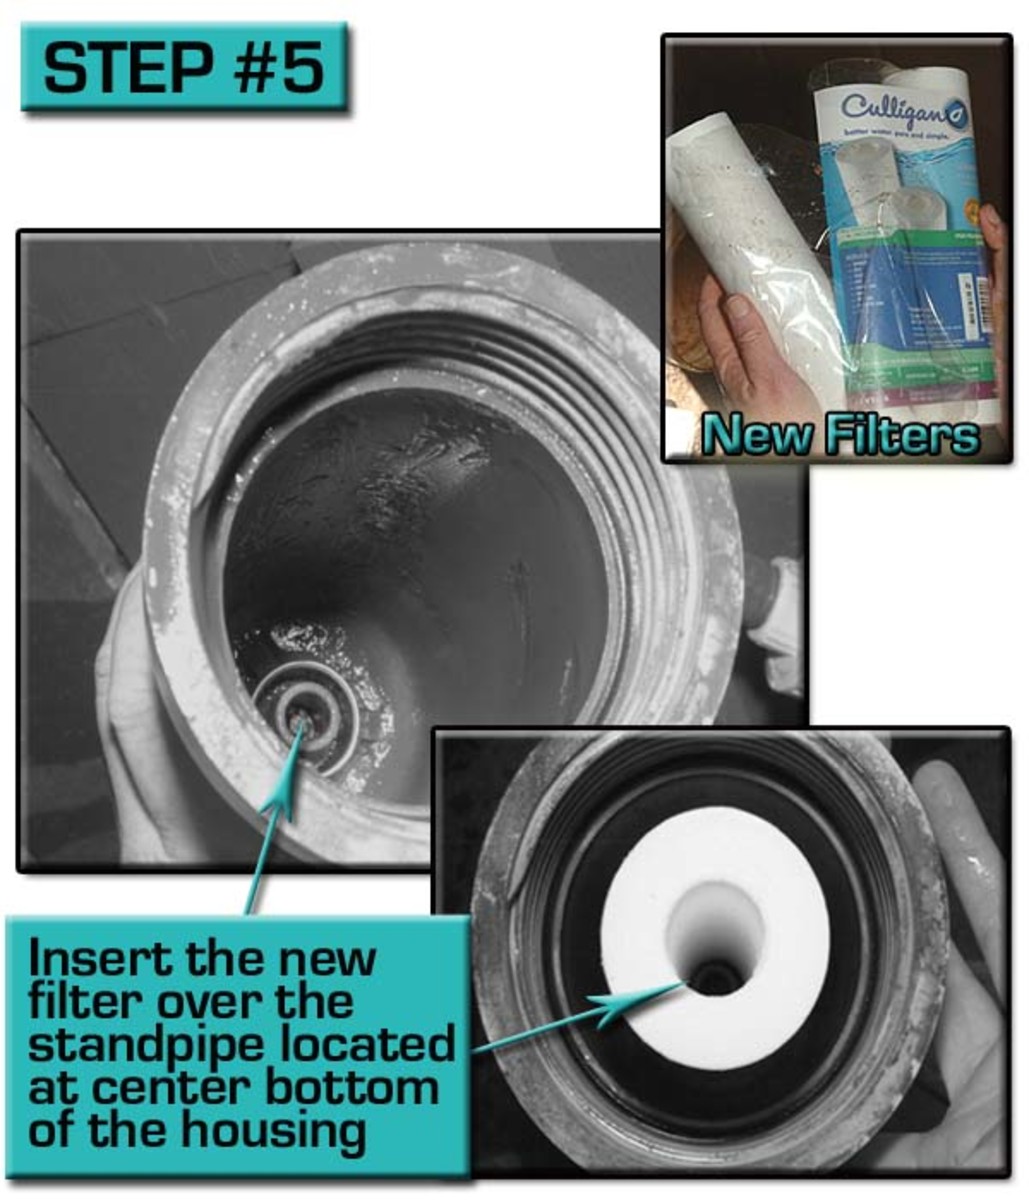 Install New Water-Filter Cartridge